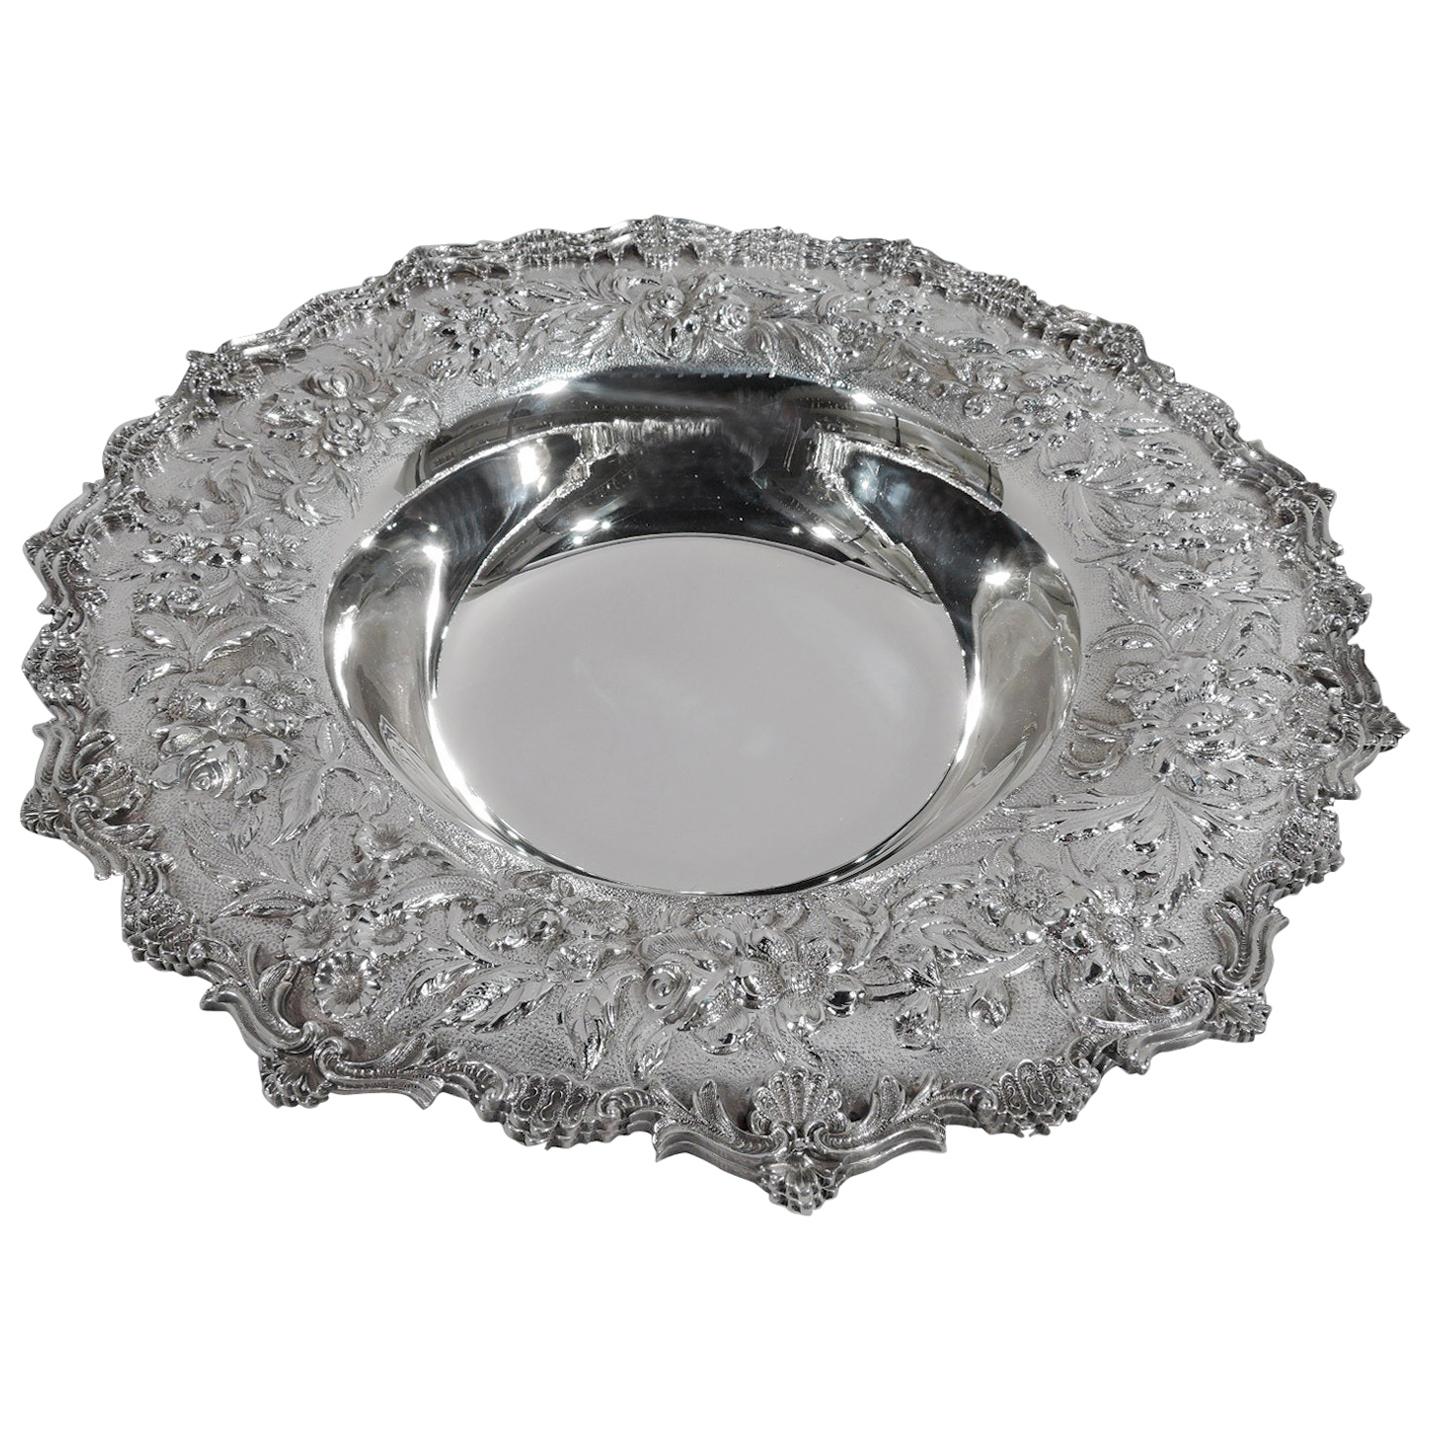 Kirk Sterling Silver Bowl with Pretty Traditional Floral Repousse